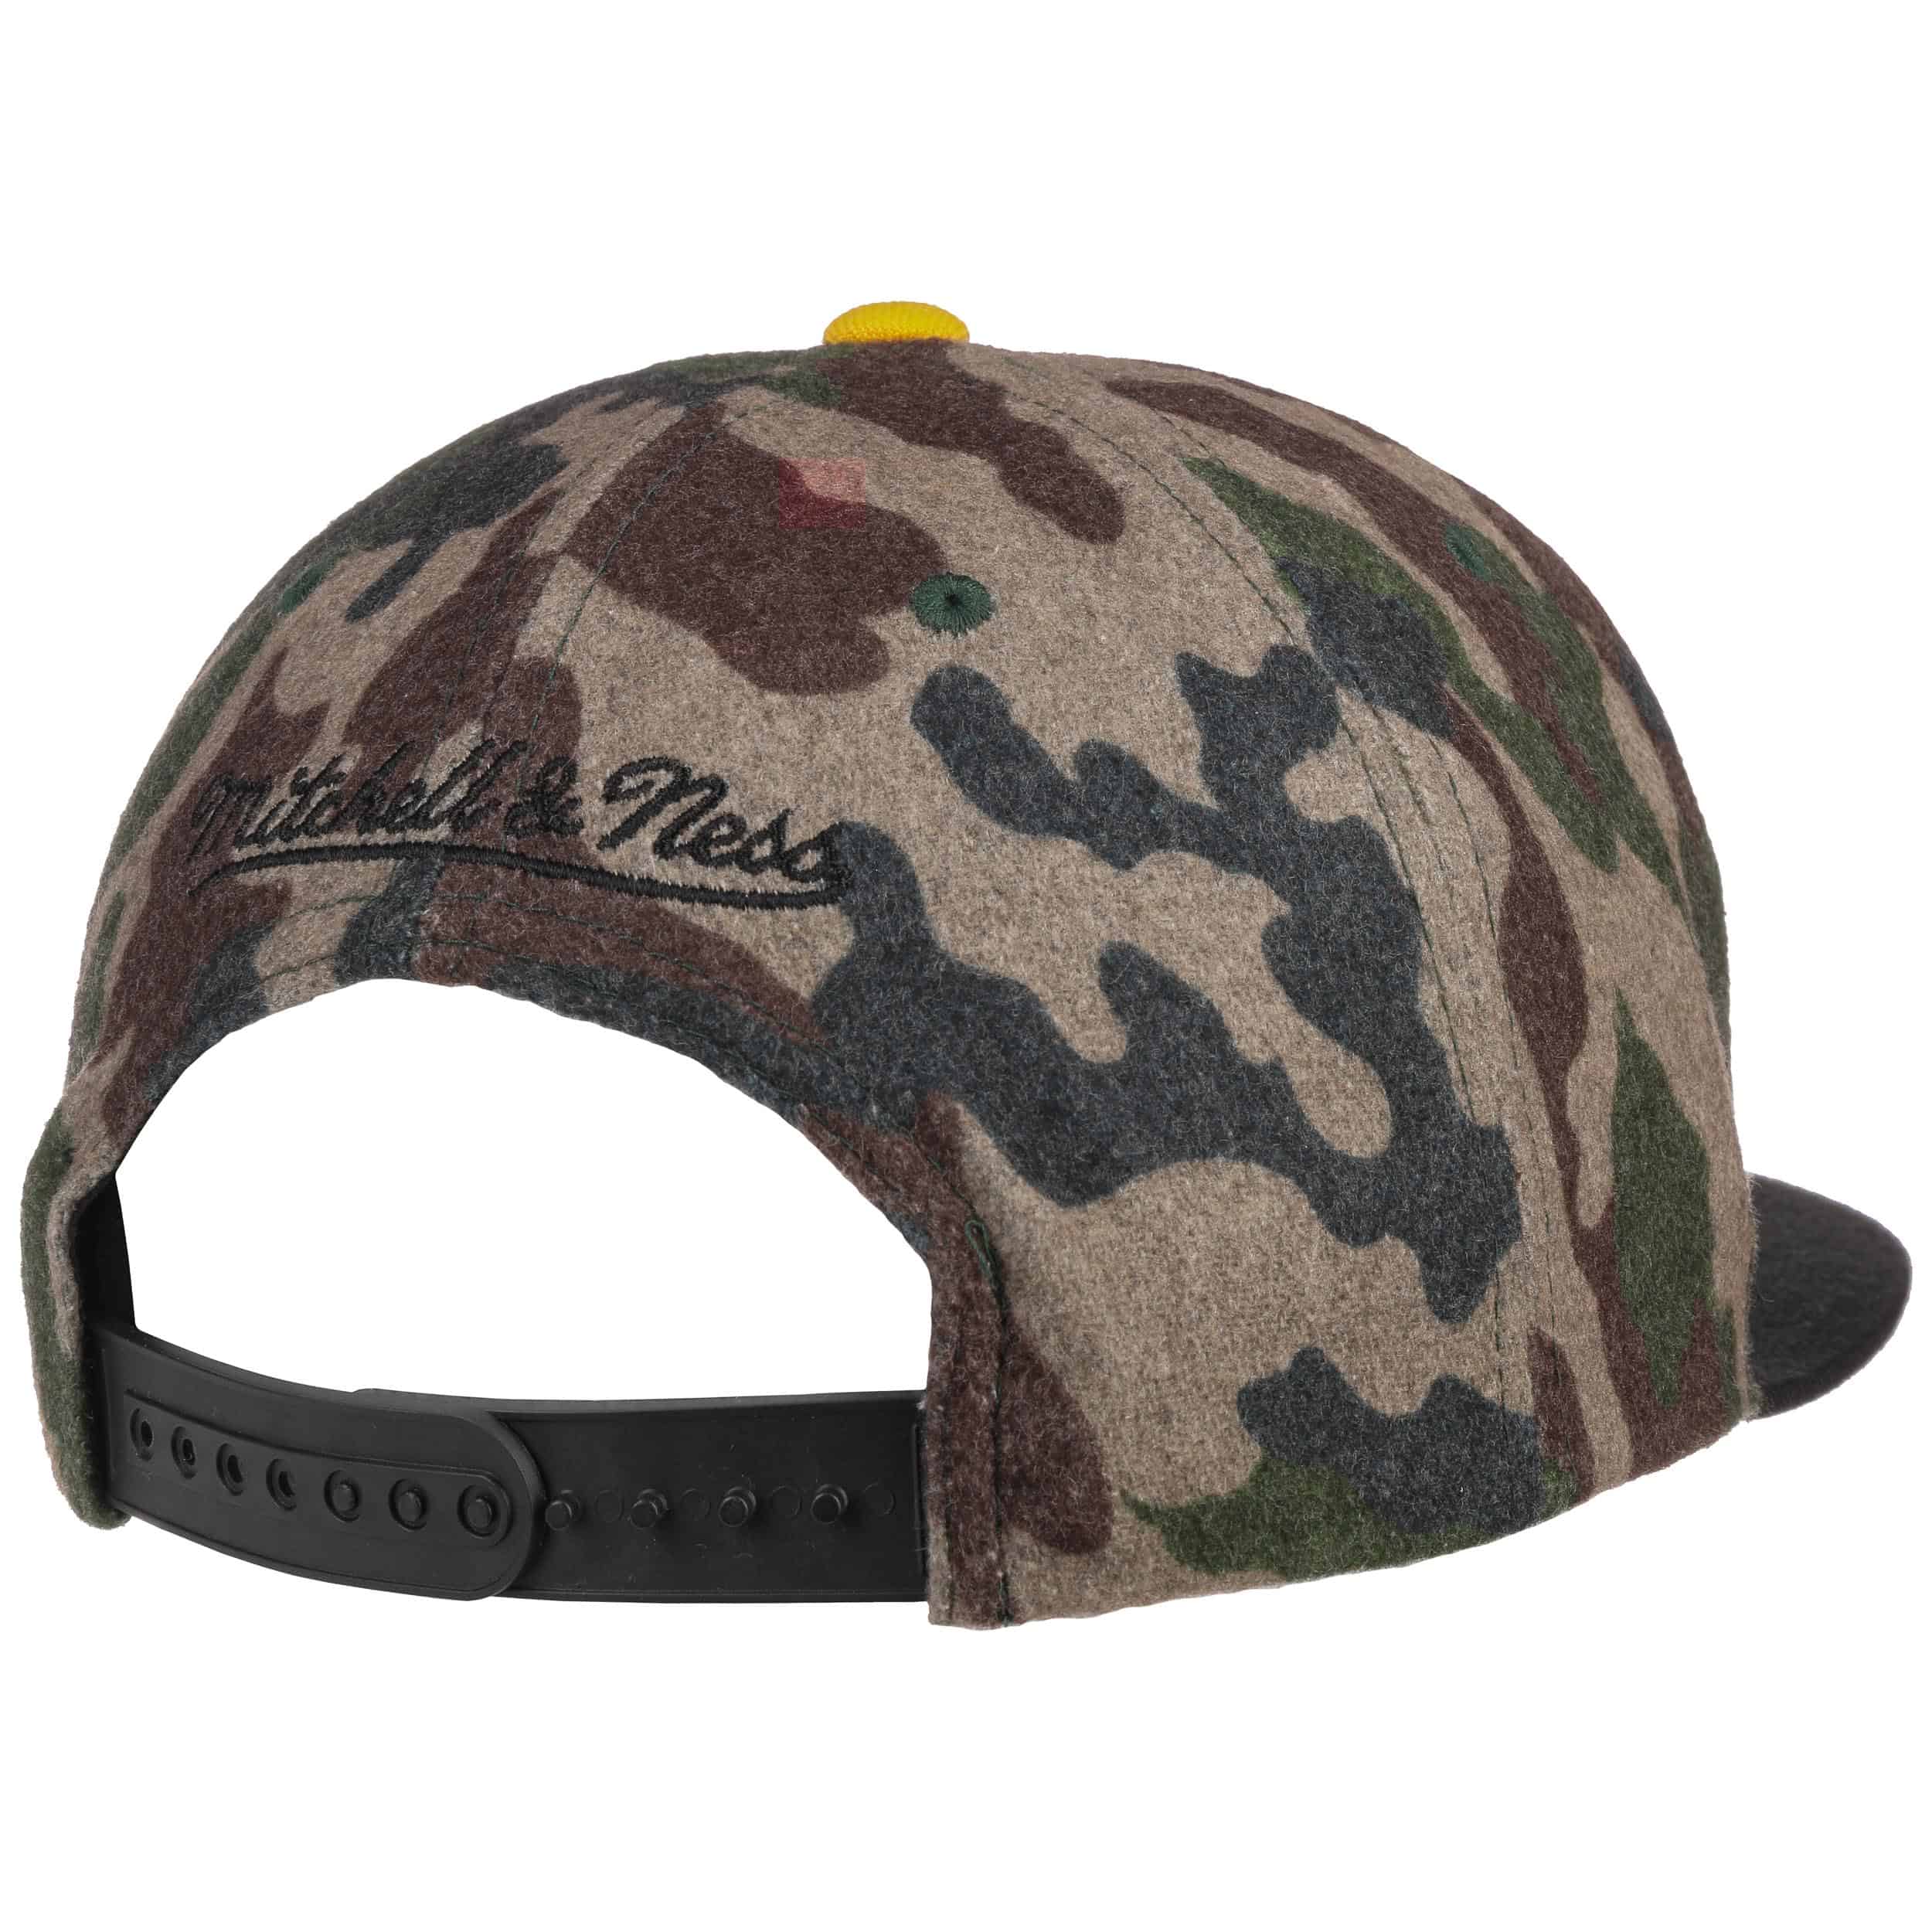 HWC Camo Flannel Lakers Cap by Mitchell & Ness - 28,95 €